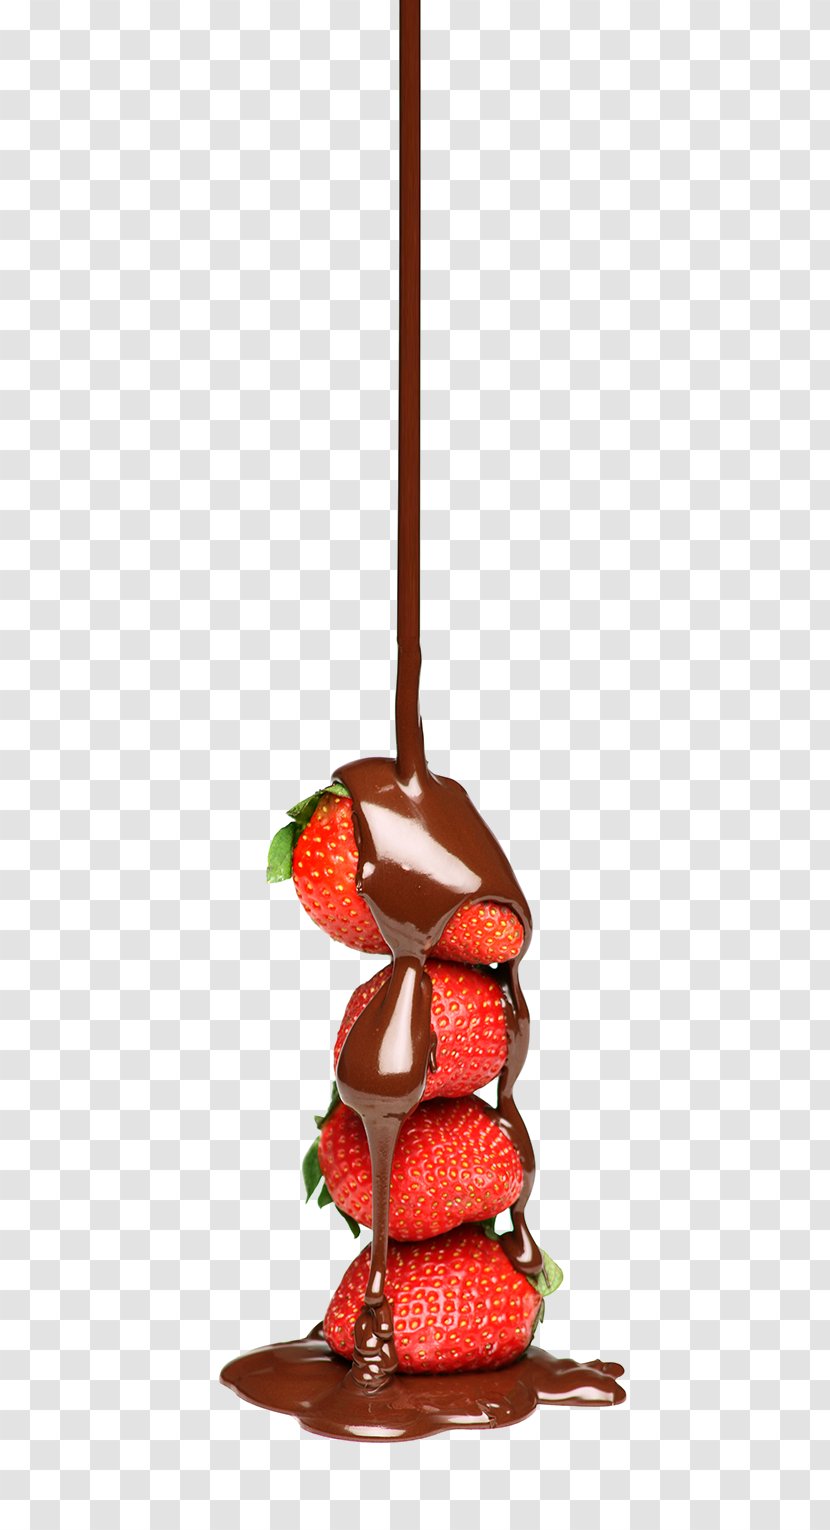 Stock Photography Chocolate-covered Fruit Strawberry Chocolate Fondue - Barra De Con Leche Transparent PNG